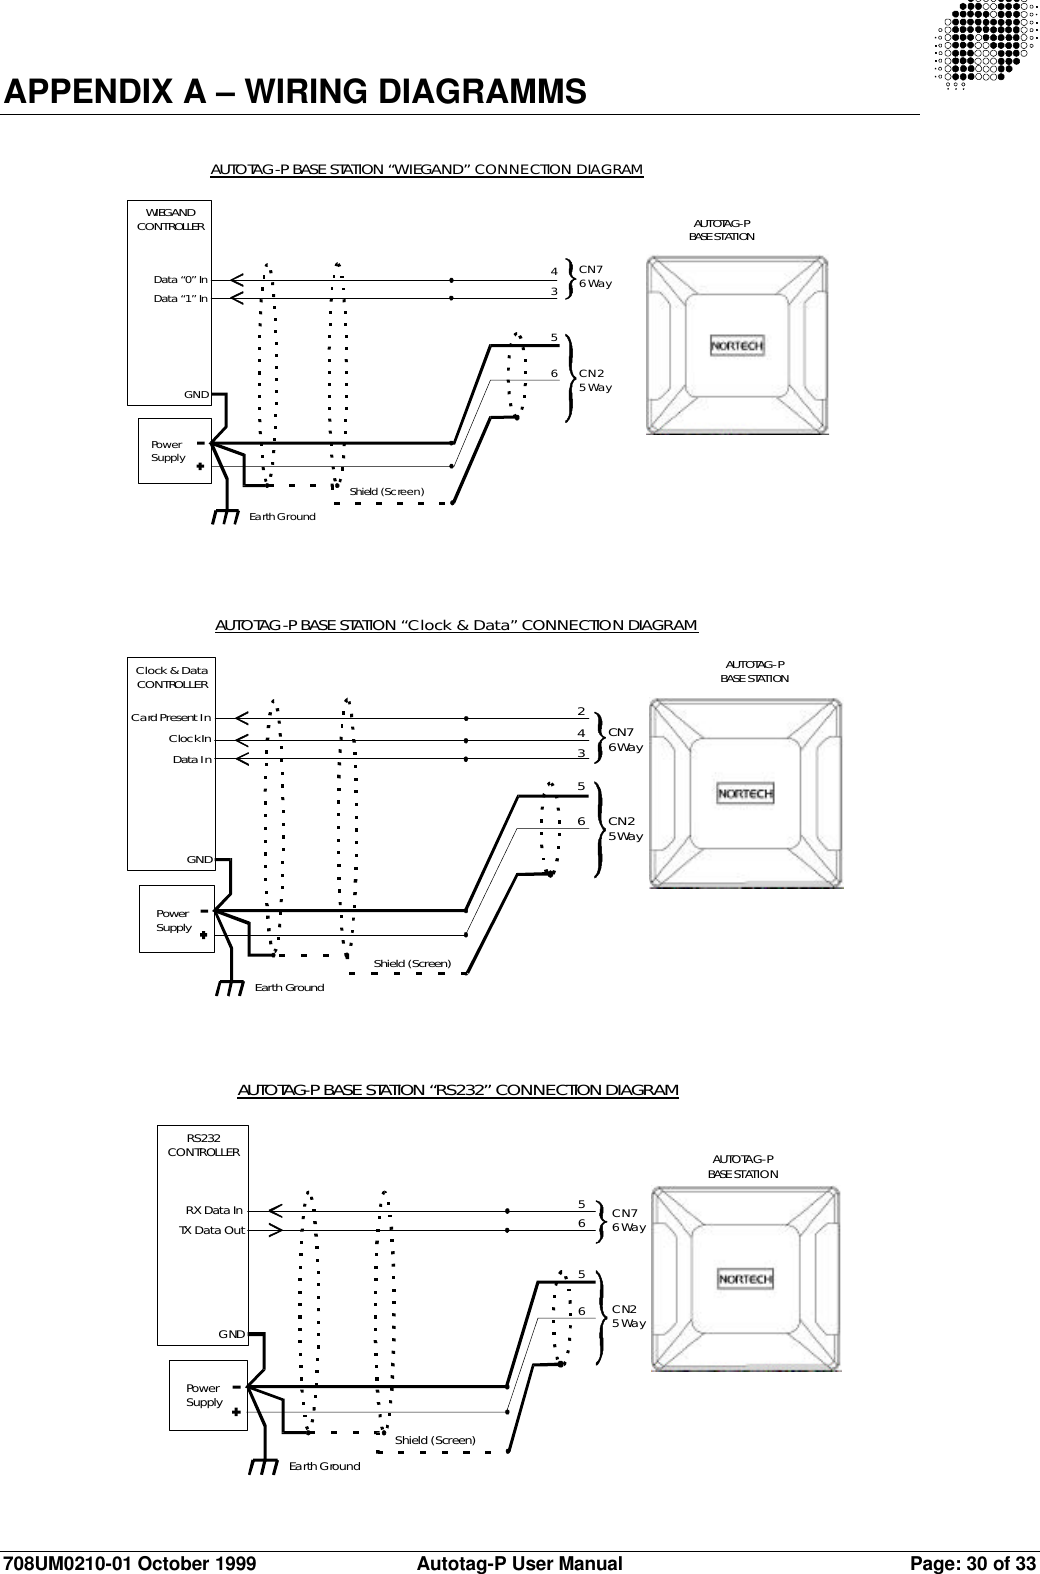 708UM0210-01 October 1999 Autotag-P User Manual Page: 30 of 33APPENDIX A – WIRING DIAGRAMMSRS232CONTROLLERRX Data InTX Data OutGNDShield (Screen)Earth GroundAUTOTAG-P BASE STATION “RS232” CONNECTION DIAGRAMPowerSupply5CN76 WayCN25 Way665AUTOTAG-PBASE STATIONClock &amp; DataCONTROLLERCard Present InClock InData InGNDShield (Screen)Earth GroundAUTOTAG-P BASE STATION “Clock &amp; Data” CONNECTION DIAGRAMPowerSupplyAUTOTAG-PBASE STATION2CN76 WayCN25 Way4365WIEGANDCONTROLLERData “0” InData “1” InGNDShield (Screen)Earth GroundAUTOTAG-P BASE STATION “WIEGAND” CONNECTION DIAGRAMPowerSupplyAUTOTAG-PBASE STATION4CN76 WayCN25 Way365